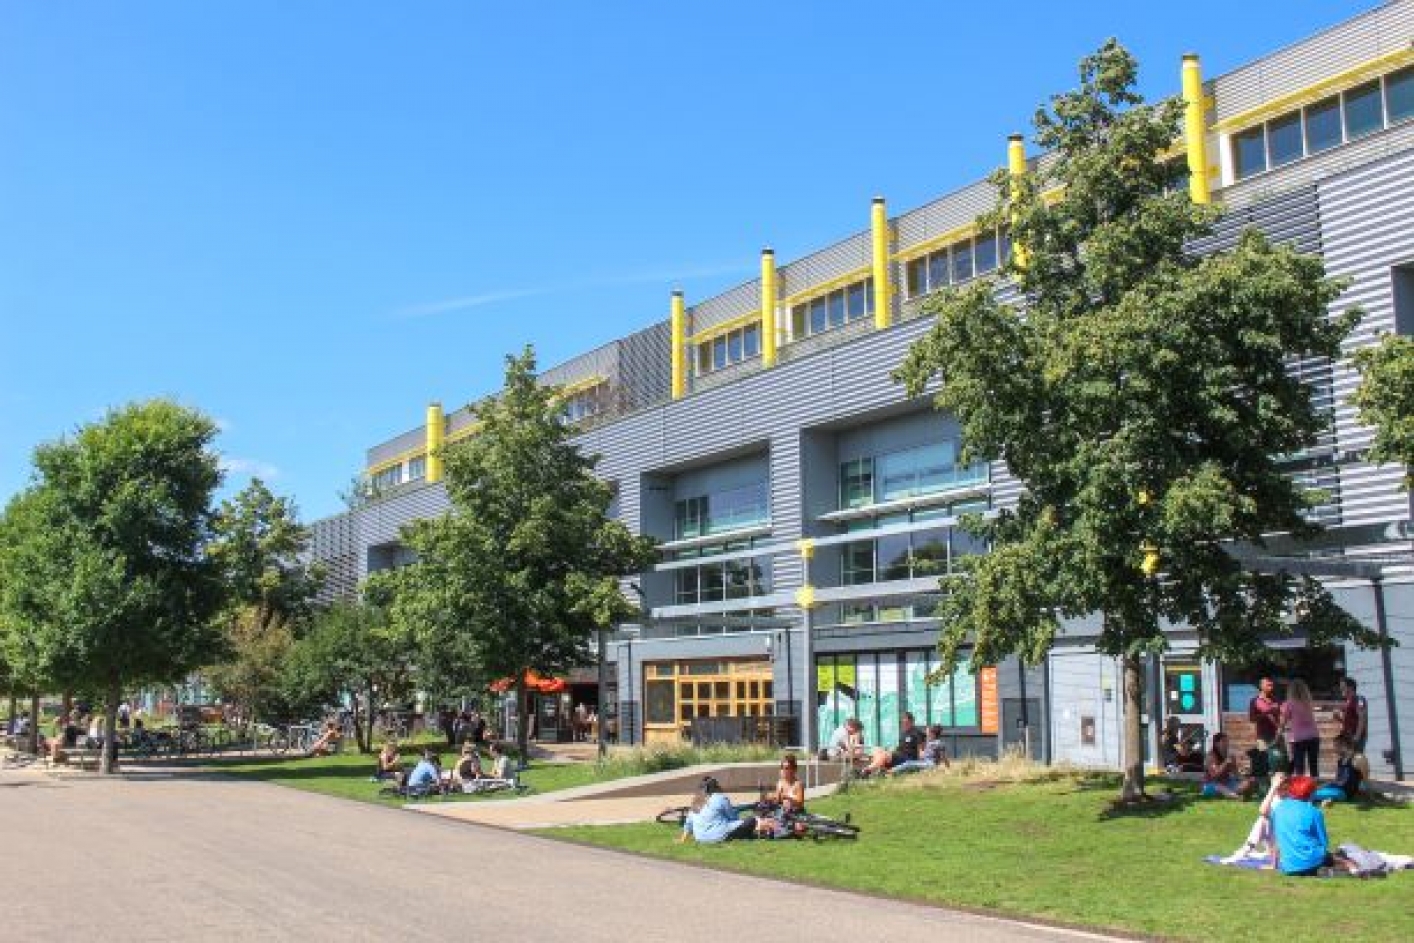 People sitting and reclining on the grass, surrounded by trees in front of building in a business park